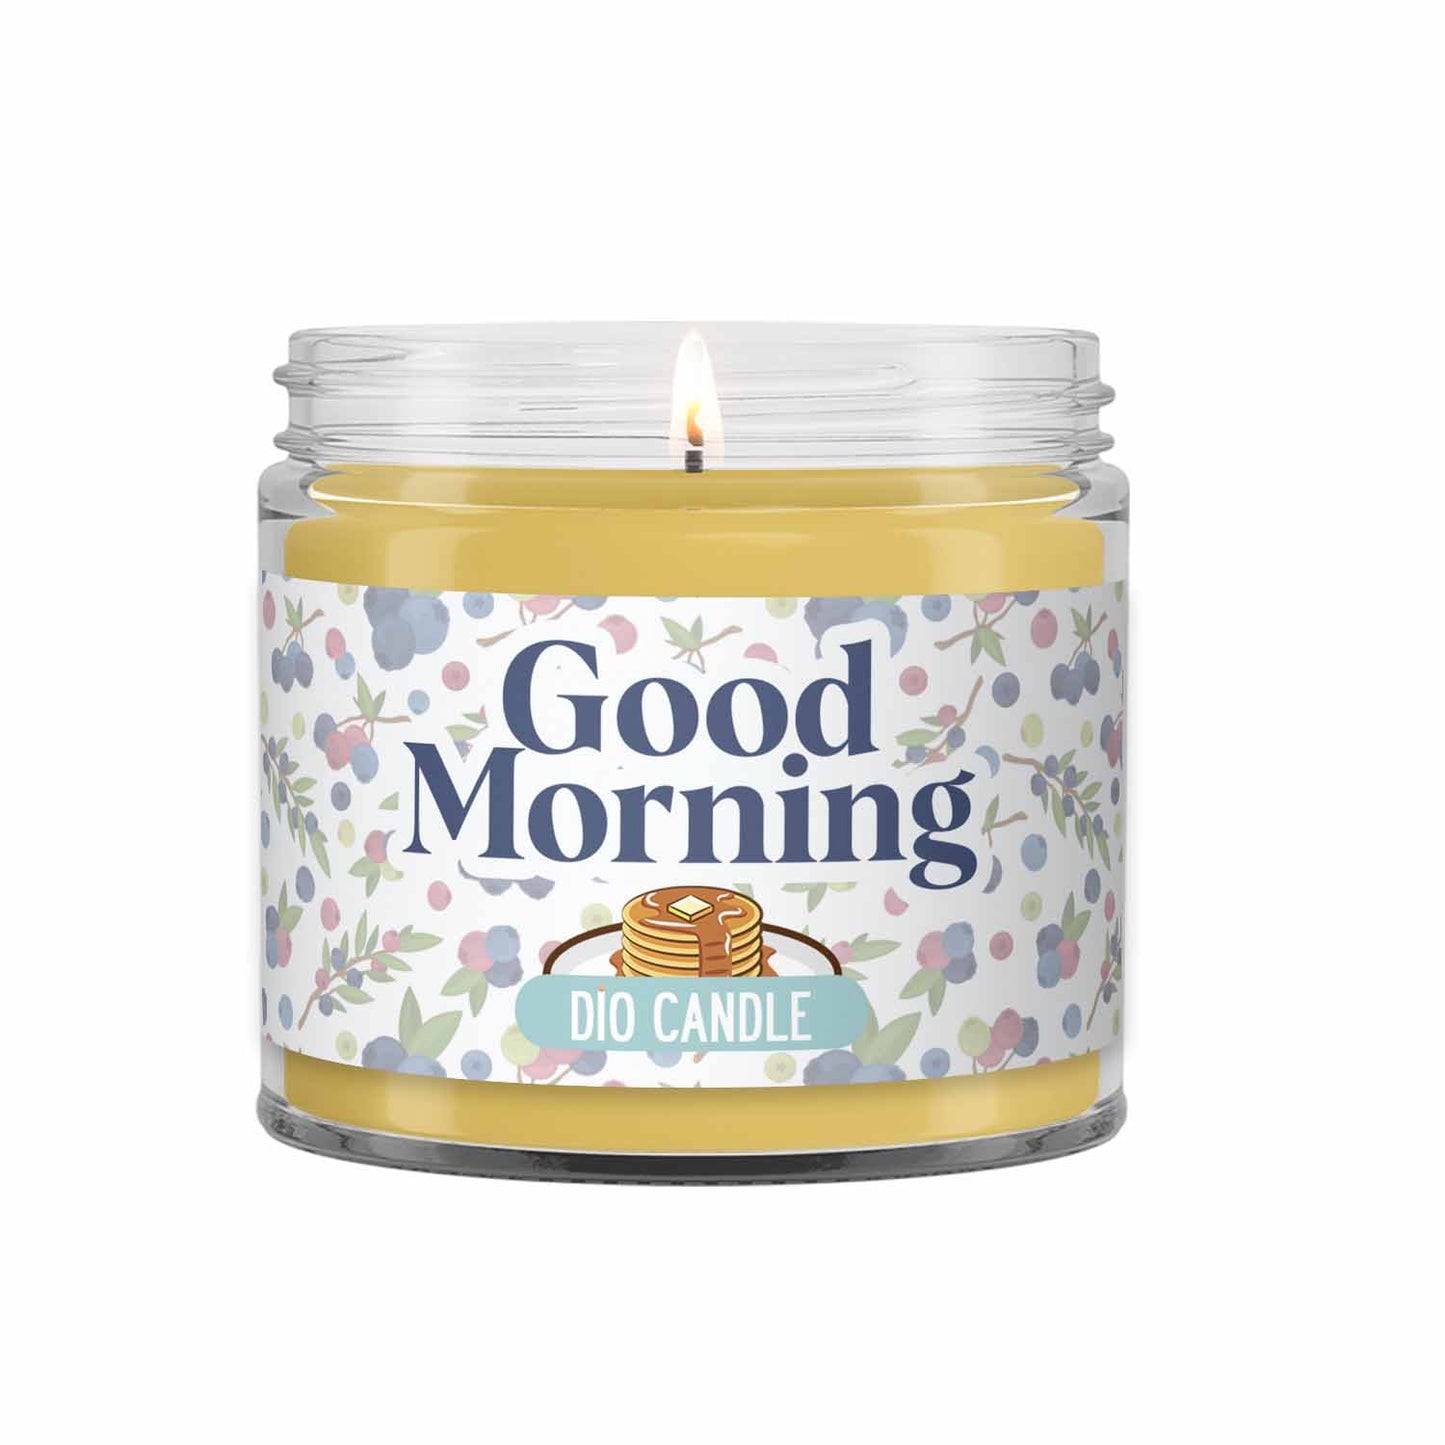 Good Morning Candle